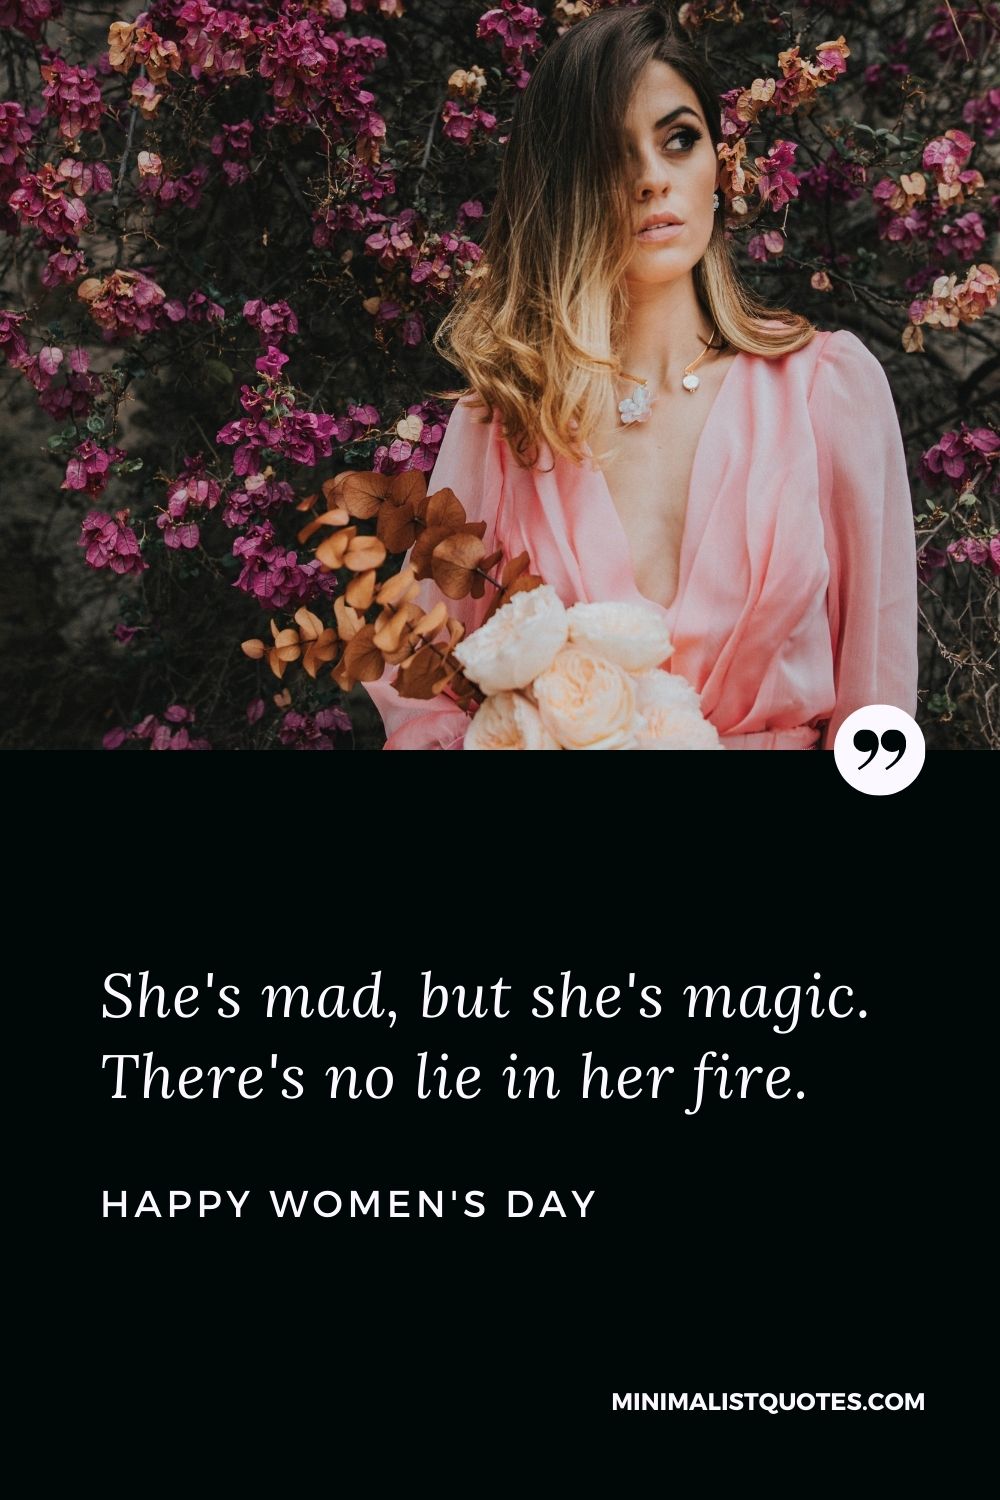 Women's Day wishes quotes with images: She's mad, but she's magic. There's no lie in her fire. Happy Women's Day!